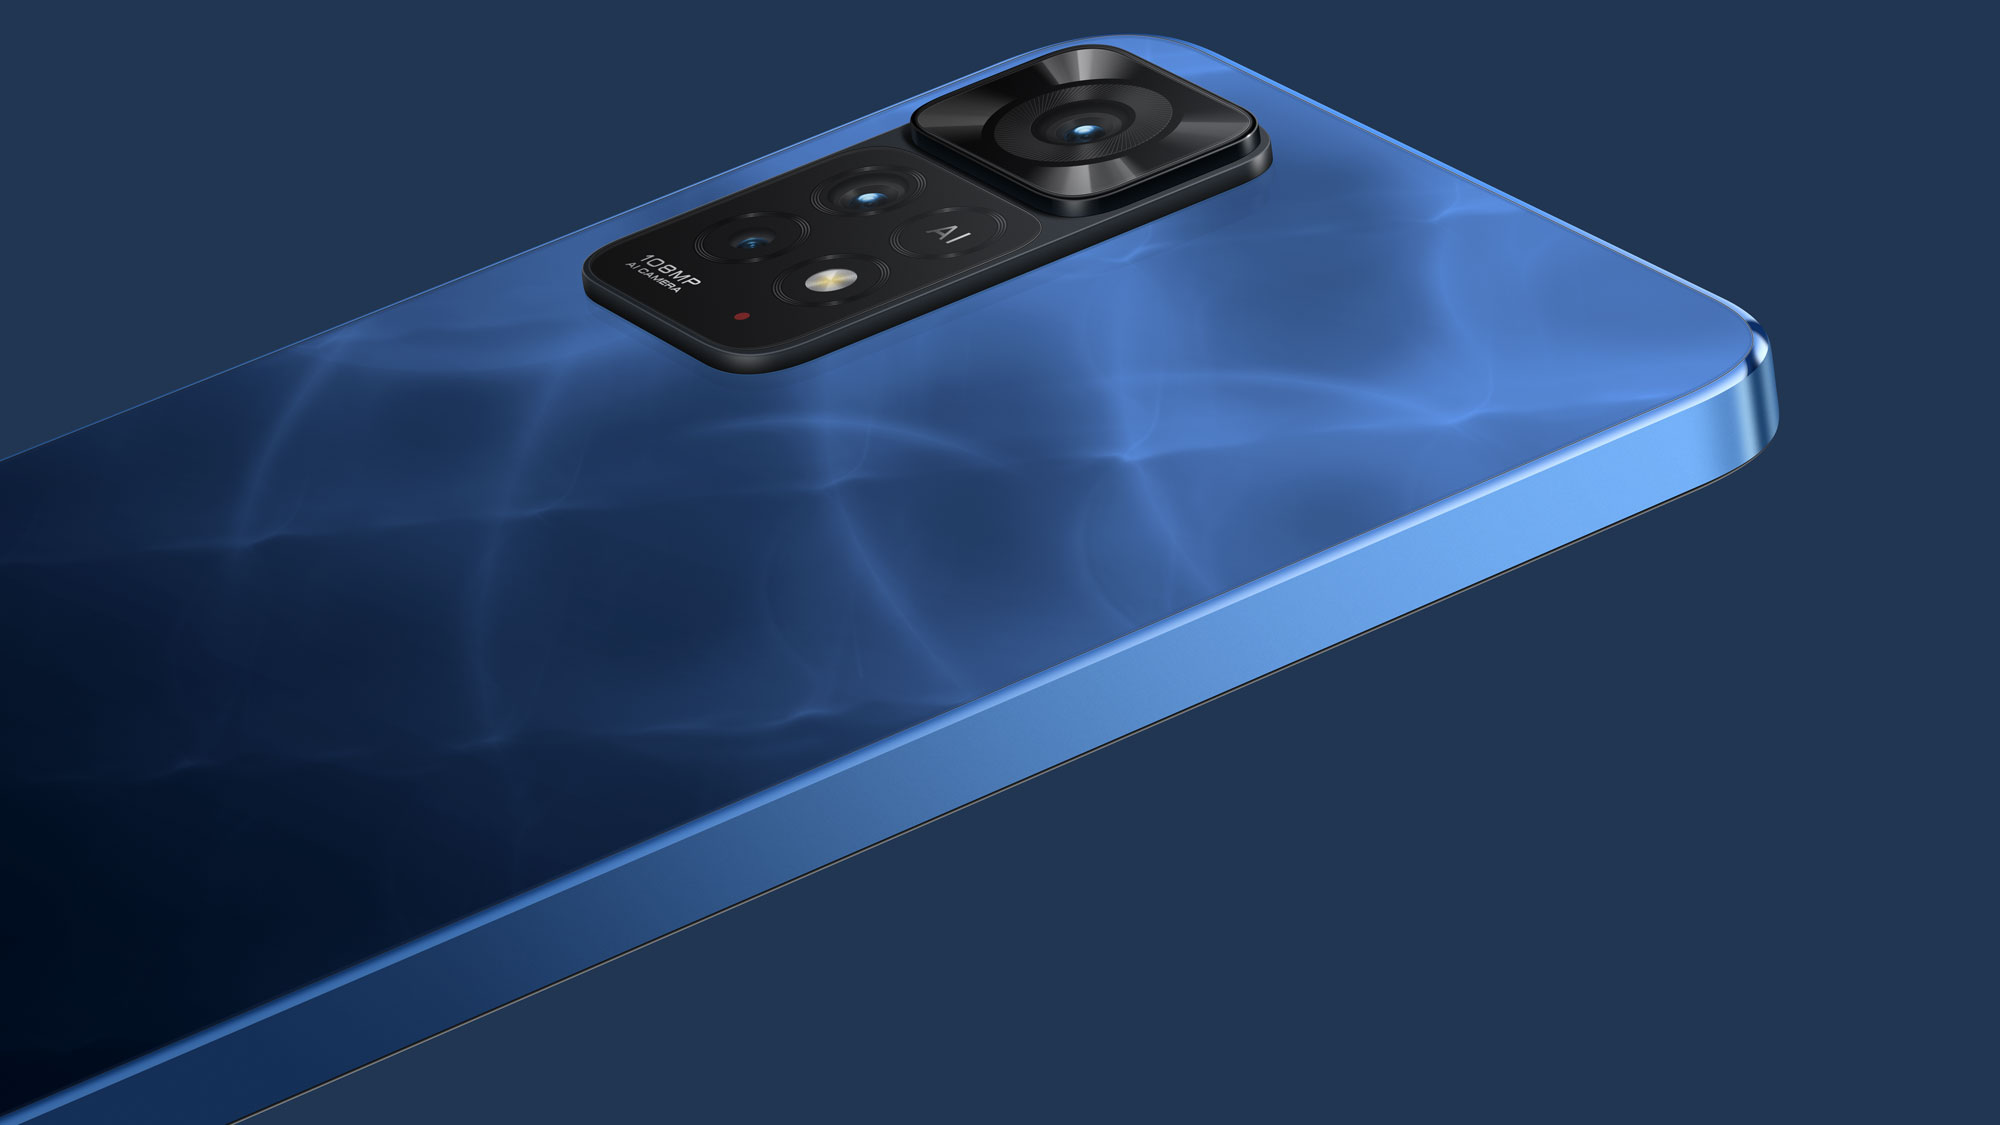 Global Xiaomi Note 11 and Note 11S phones are here offering major